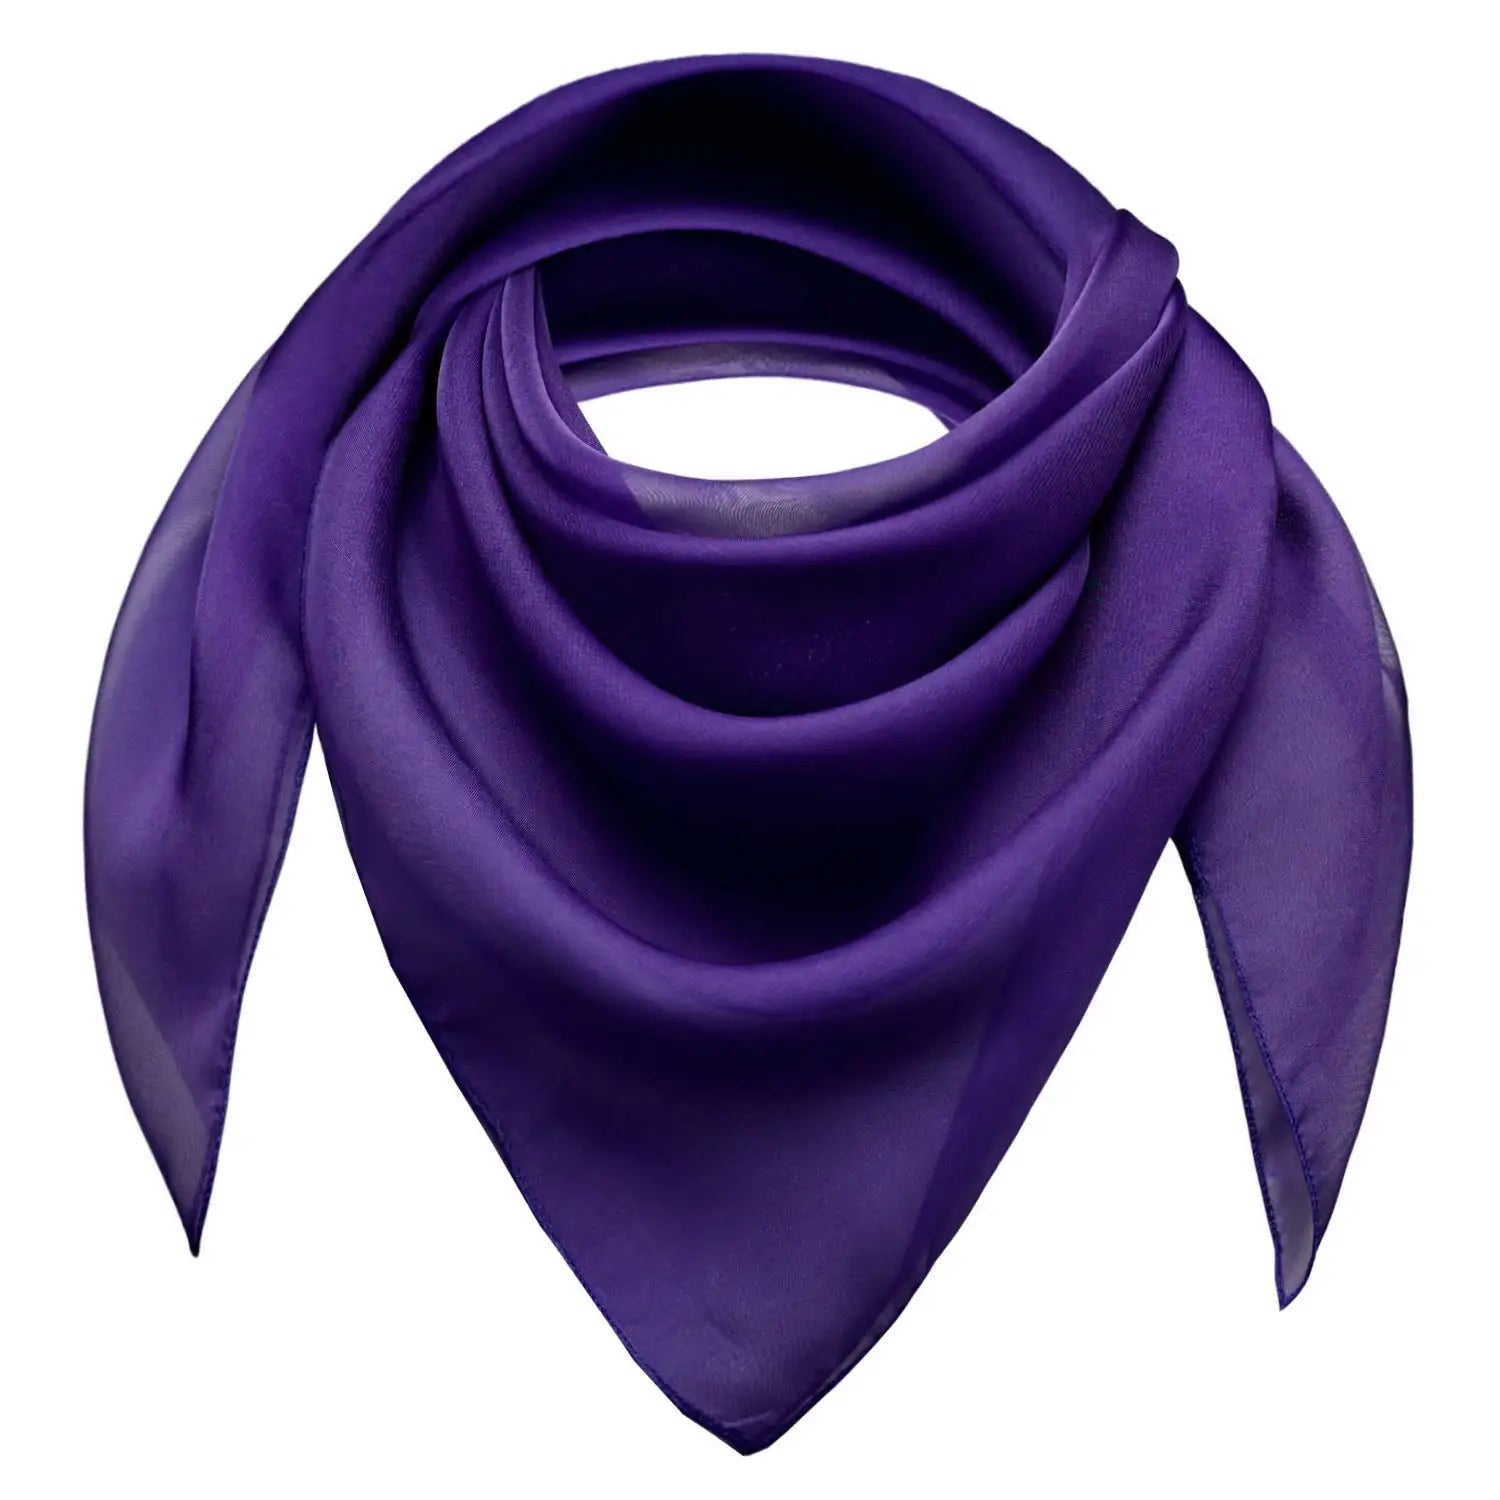 Chiffon square scarf in purple on white background